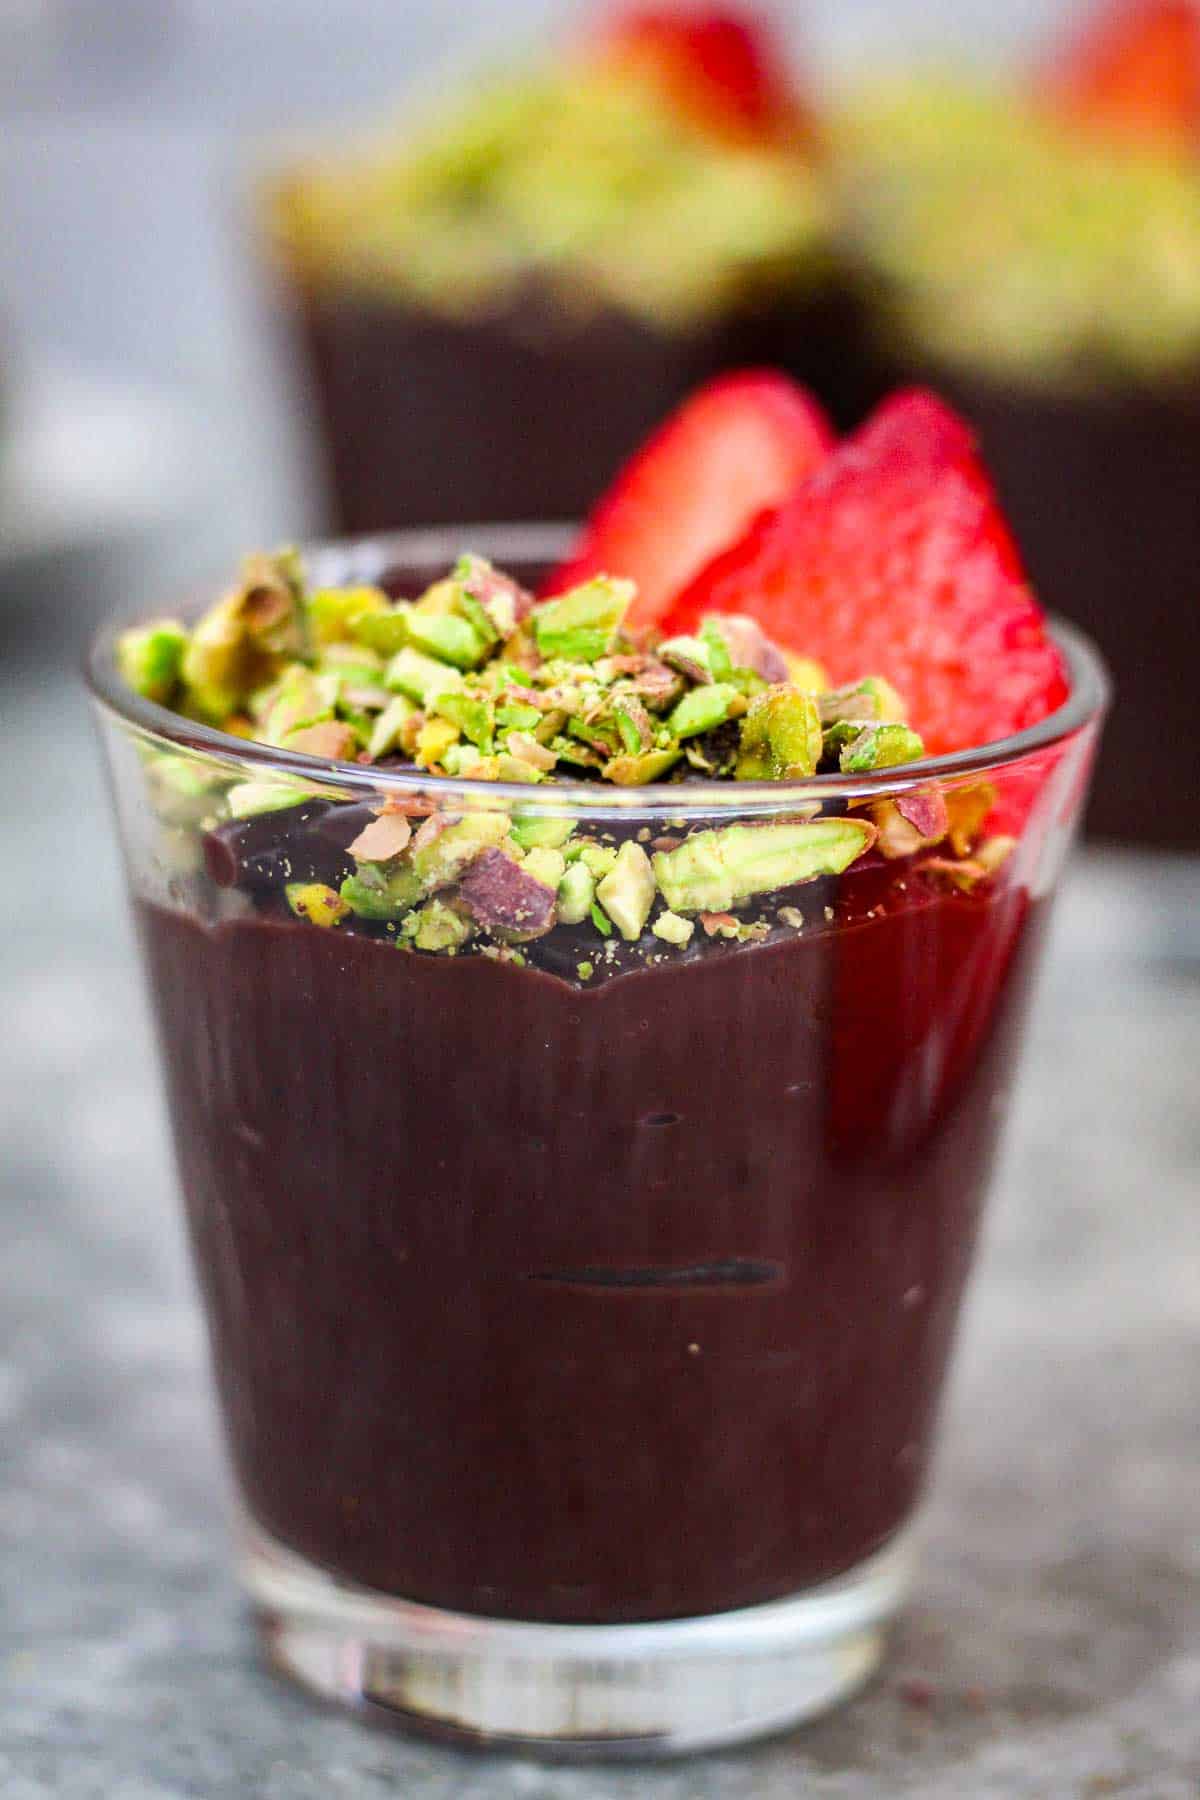 Center of the picture you see a glass with chocolate pudding topped with pistachios and strawberries. There are similar cups (though blurred) in the background.